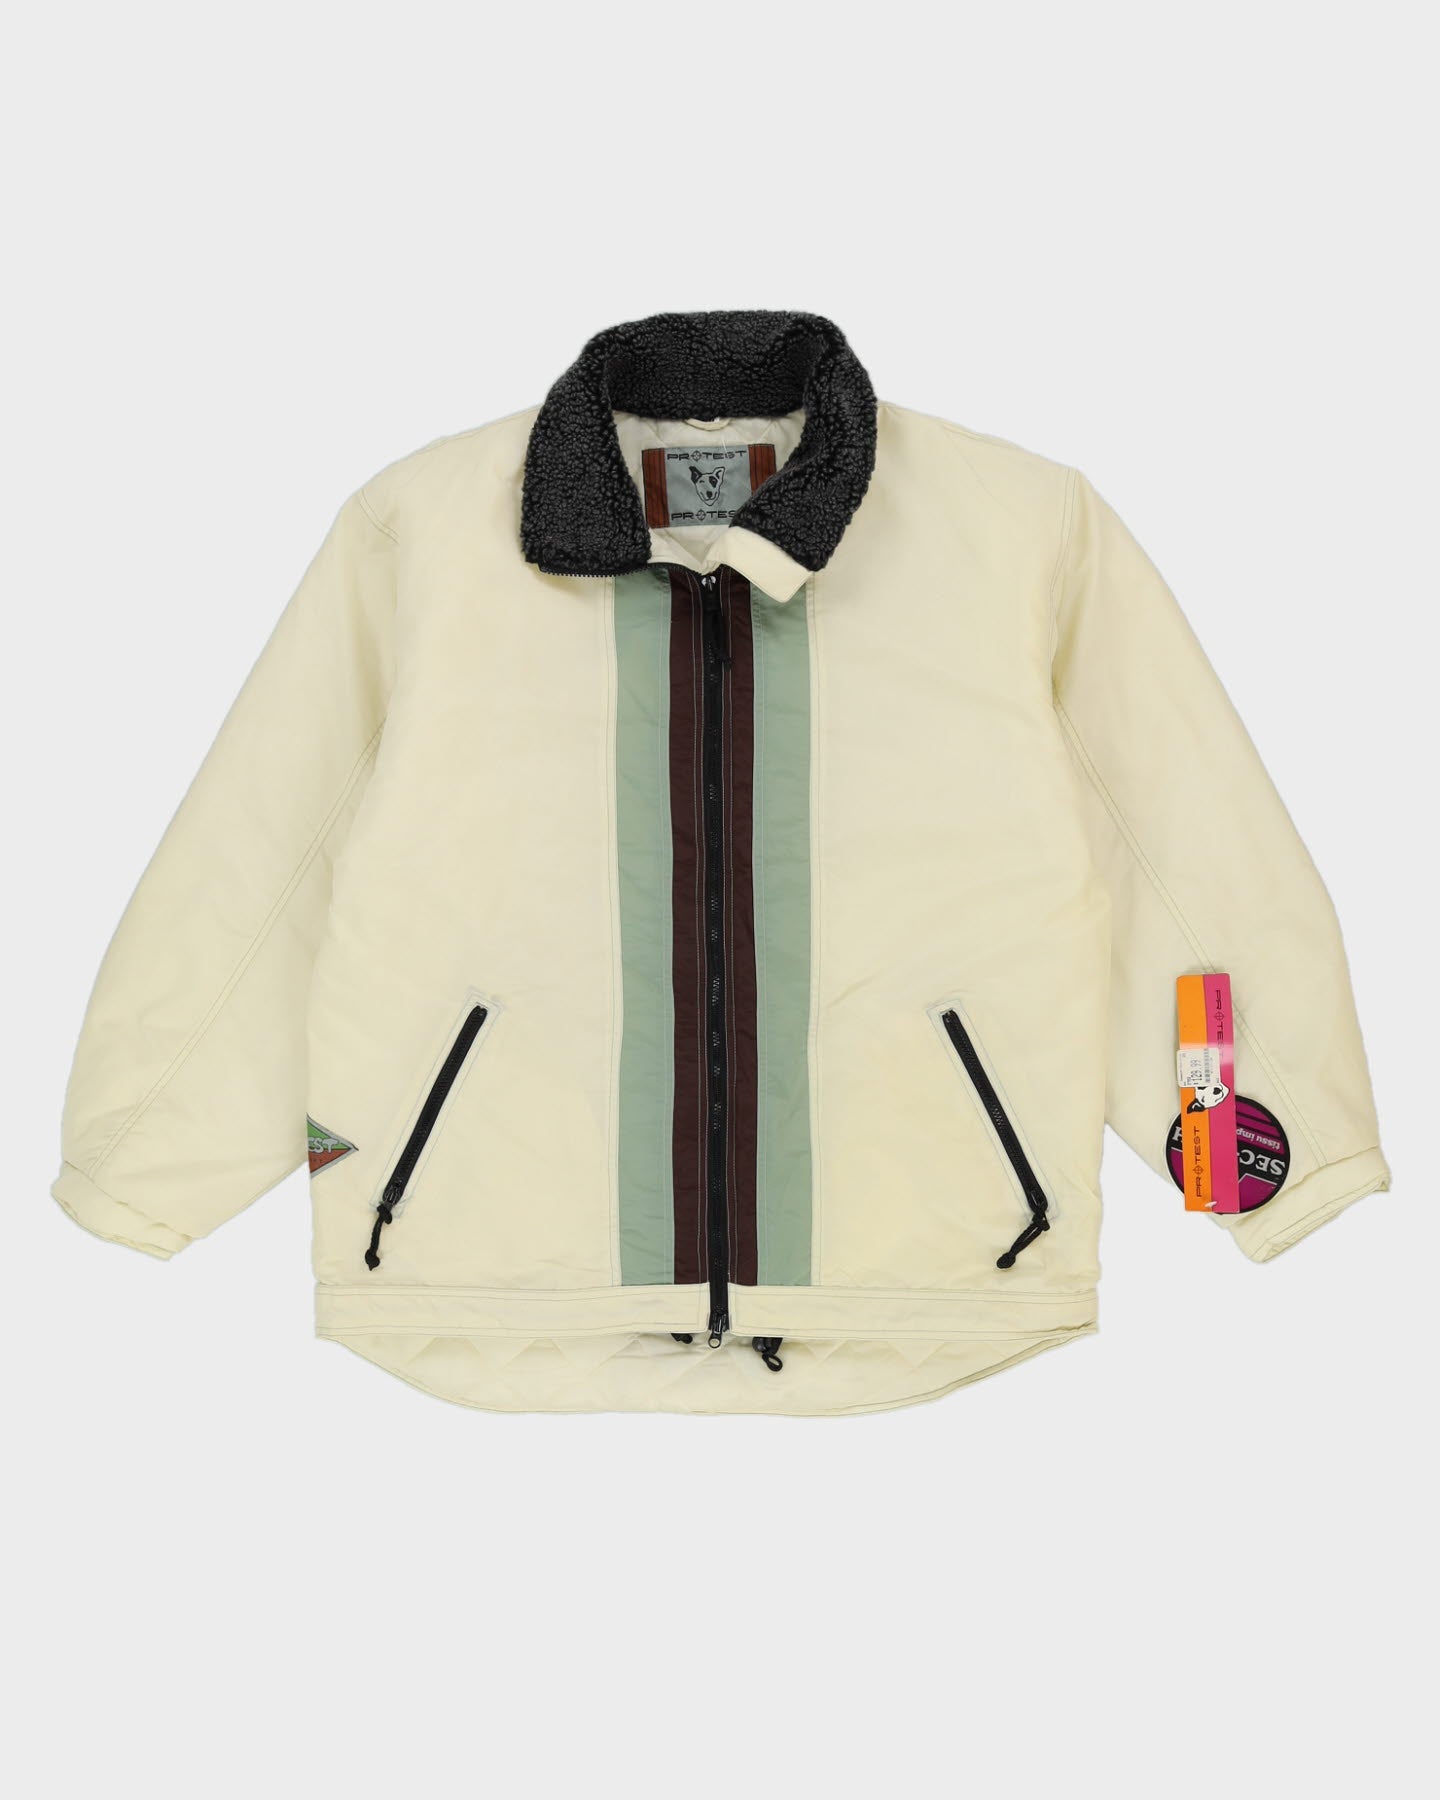 Protest Cream Ski Jacket Deadstock With Tags - XL